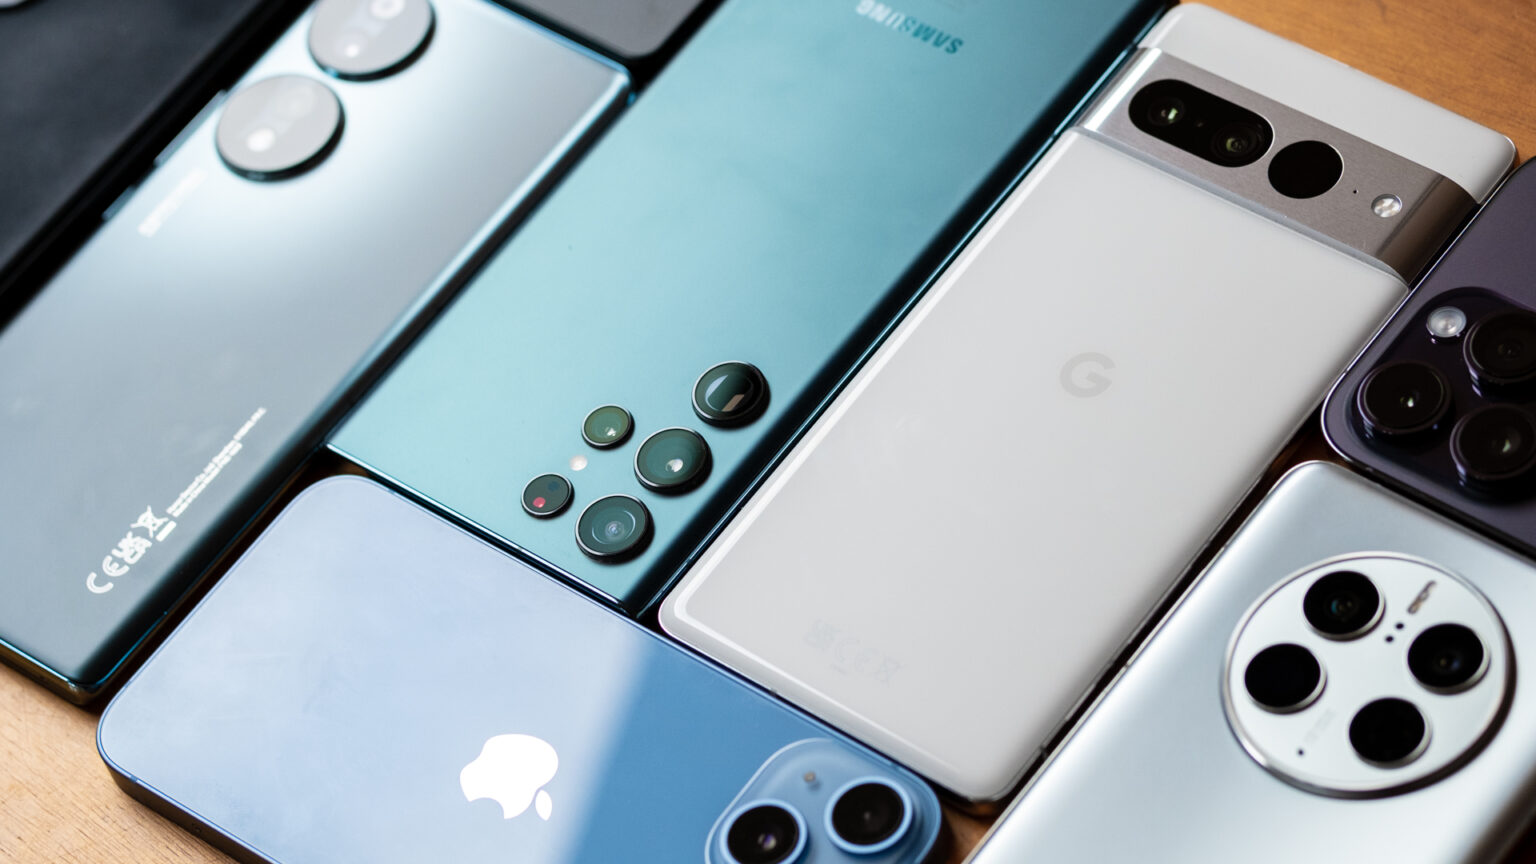 The best smartphone of the year 2022 Editor’s Choice — the winner is...